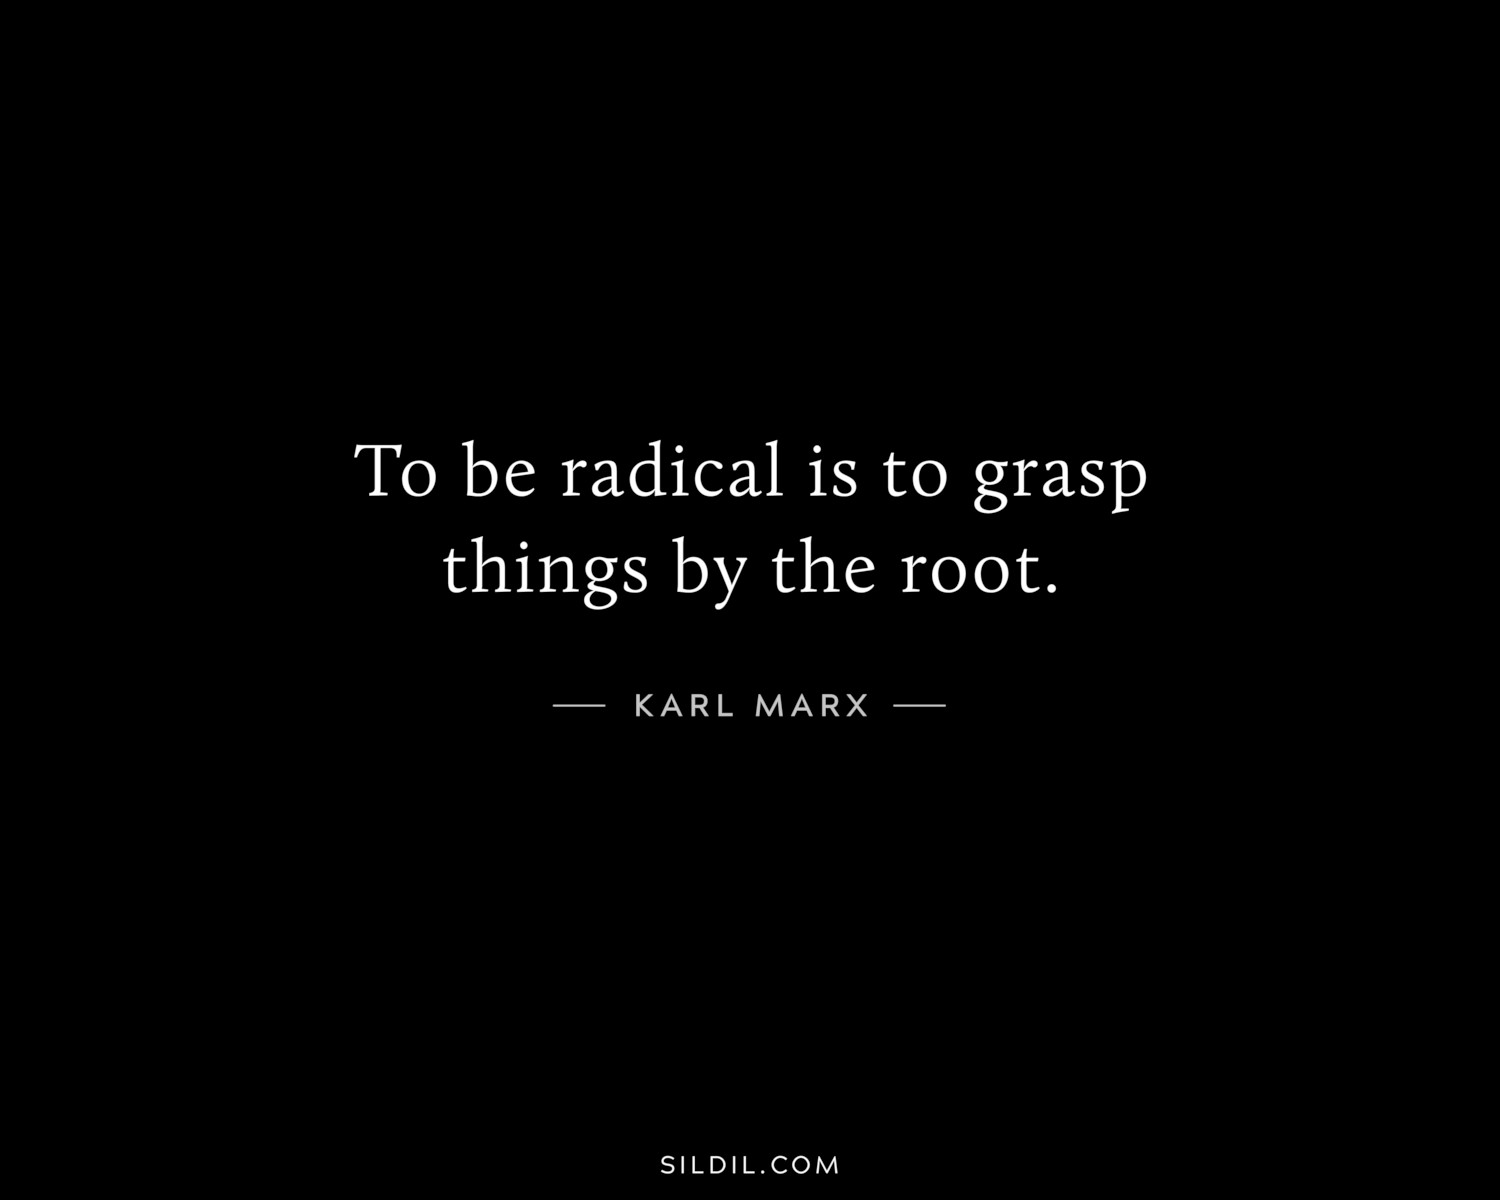 To be radical is to grasp things by the root.